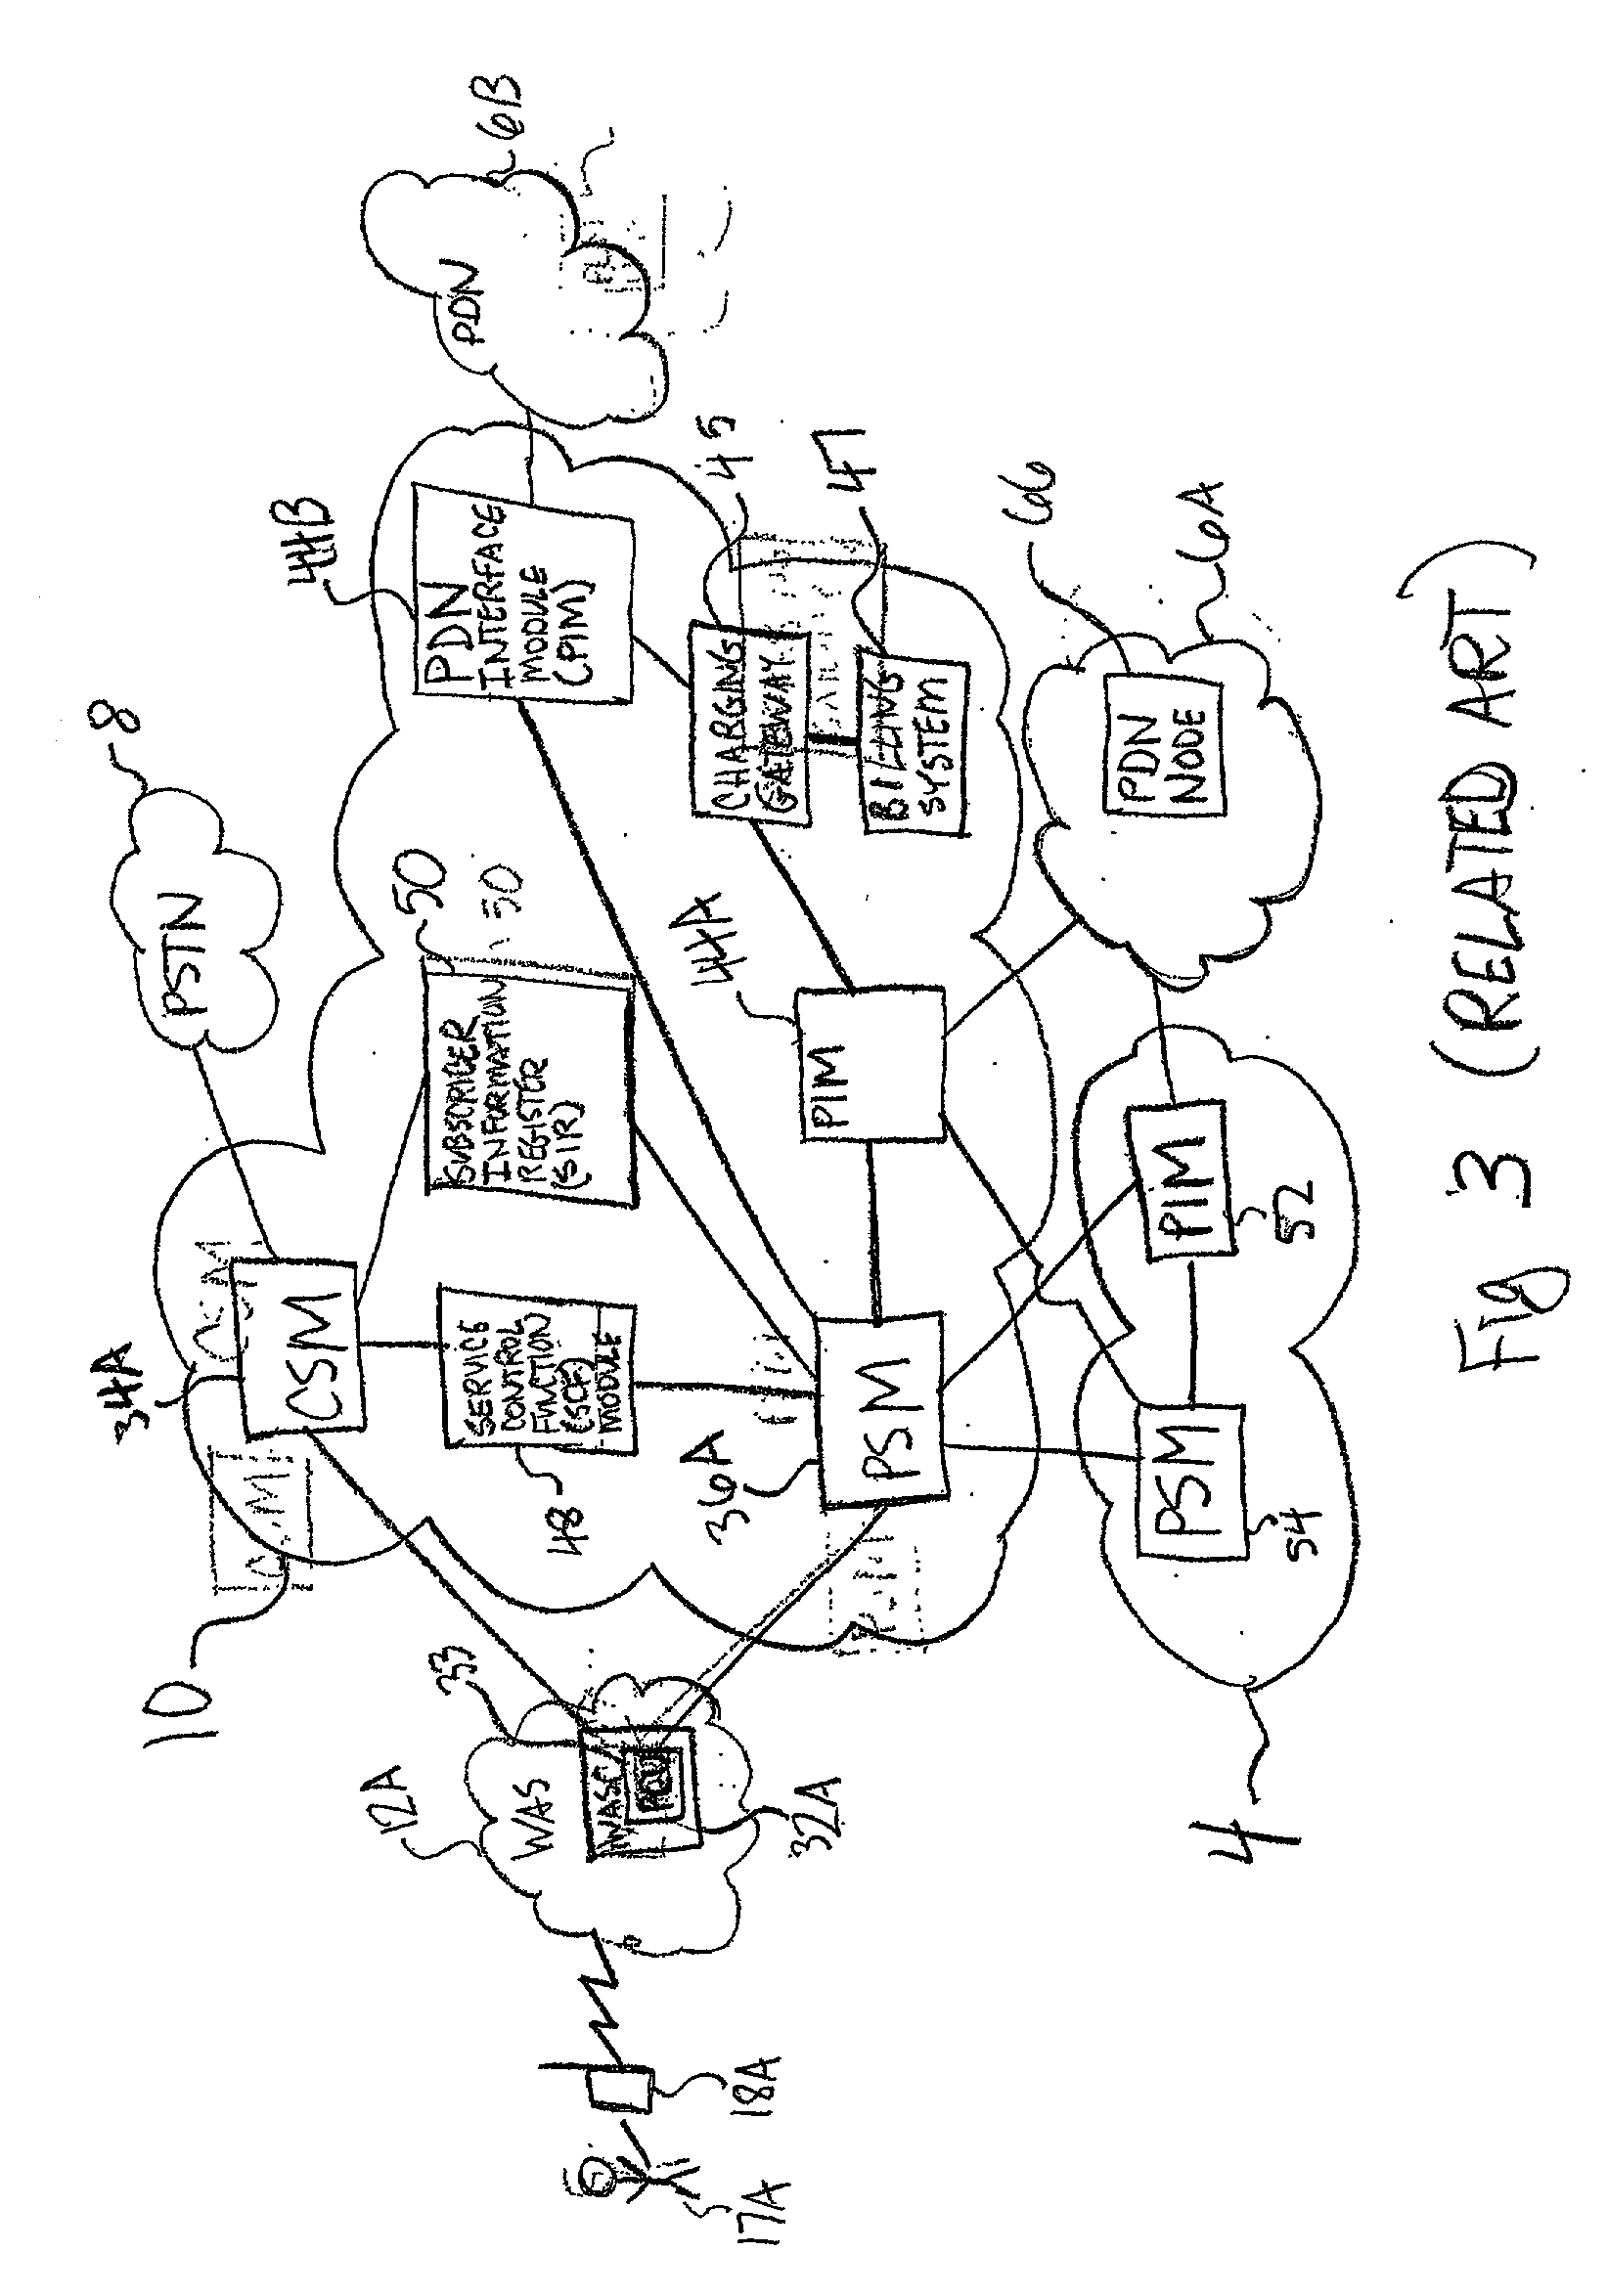 Implementing an intelligent network service for a packet-switched service using a node interfacing a mobile communications network to a packet data network